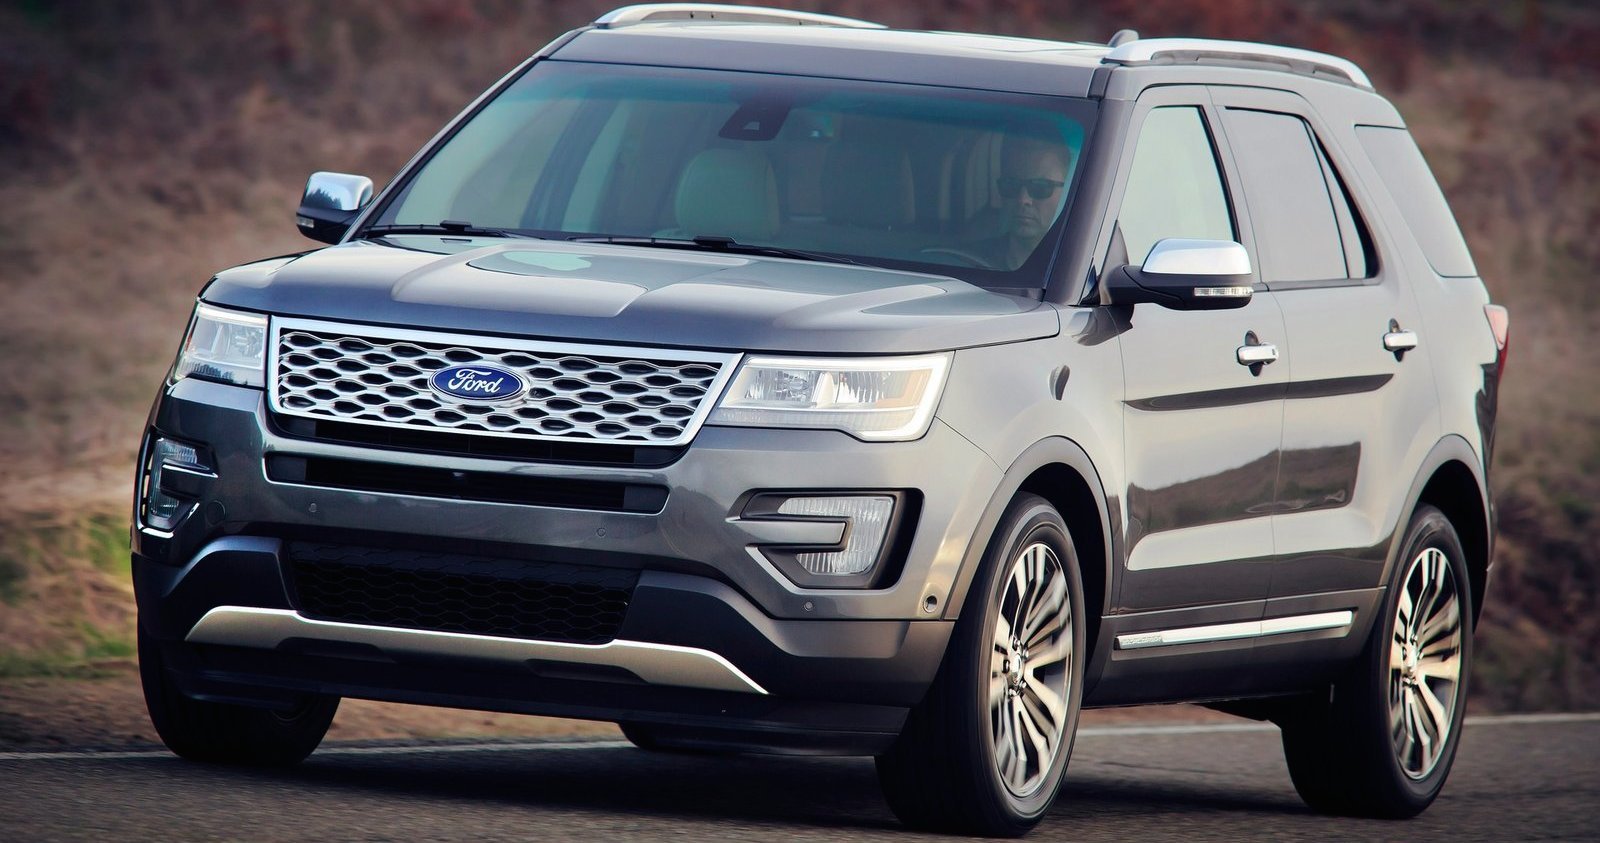 2016 Ford Explorer : New look, new technology for updated ...